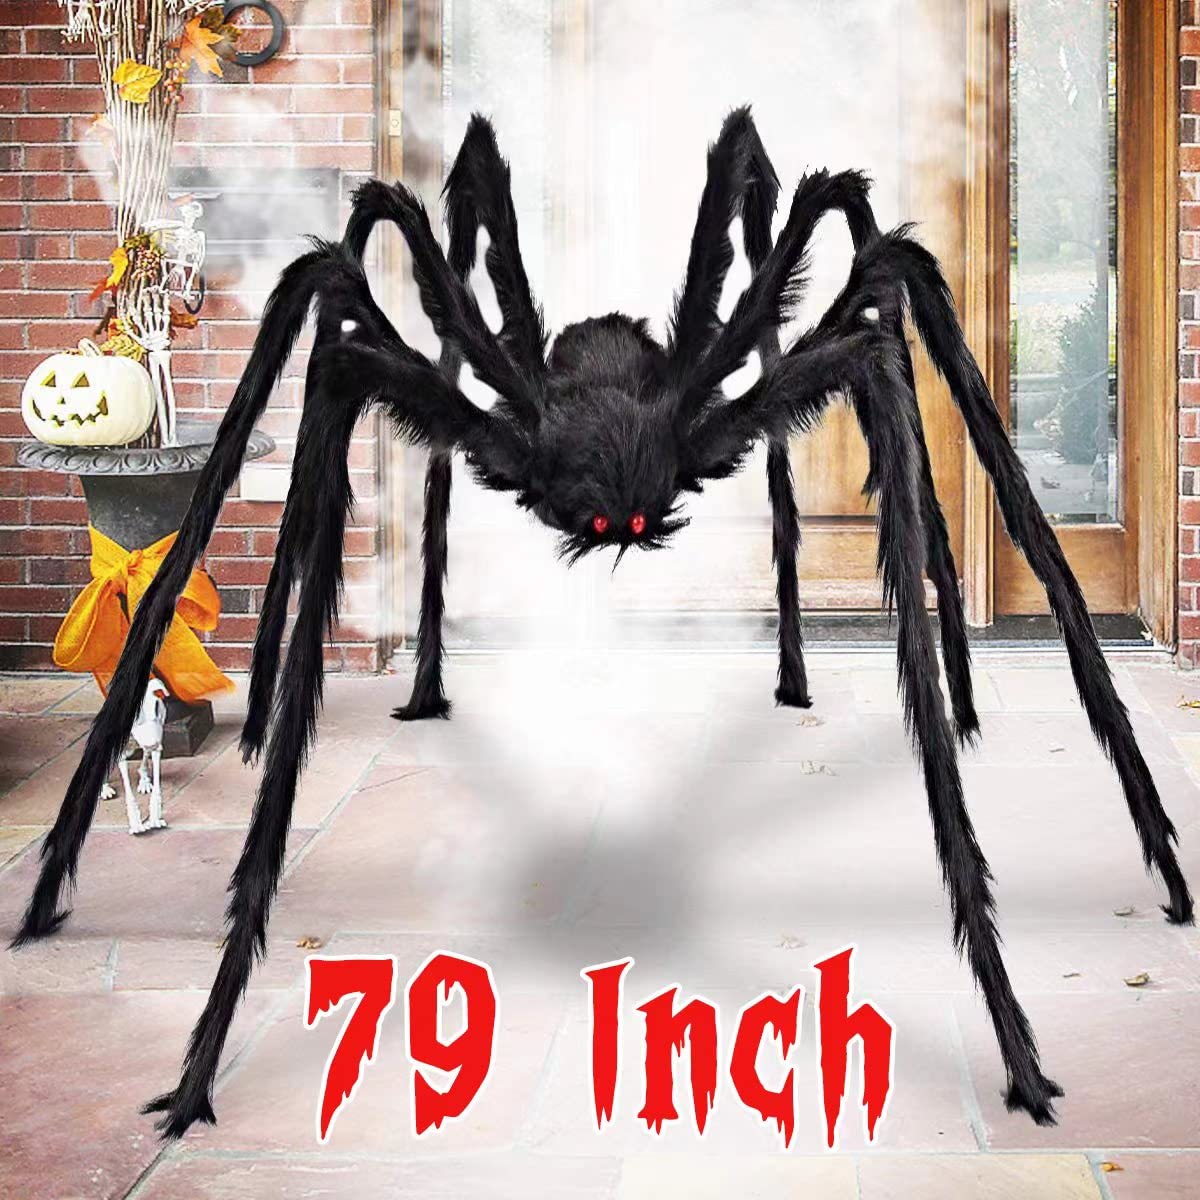 Mua Aiduy 79 Inch Outdoor Halloween Decorations Scary Giant Spider ...